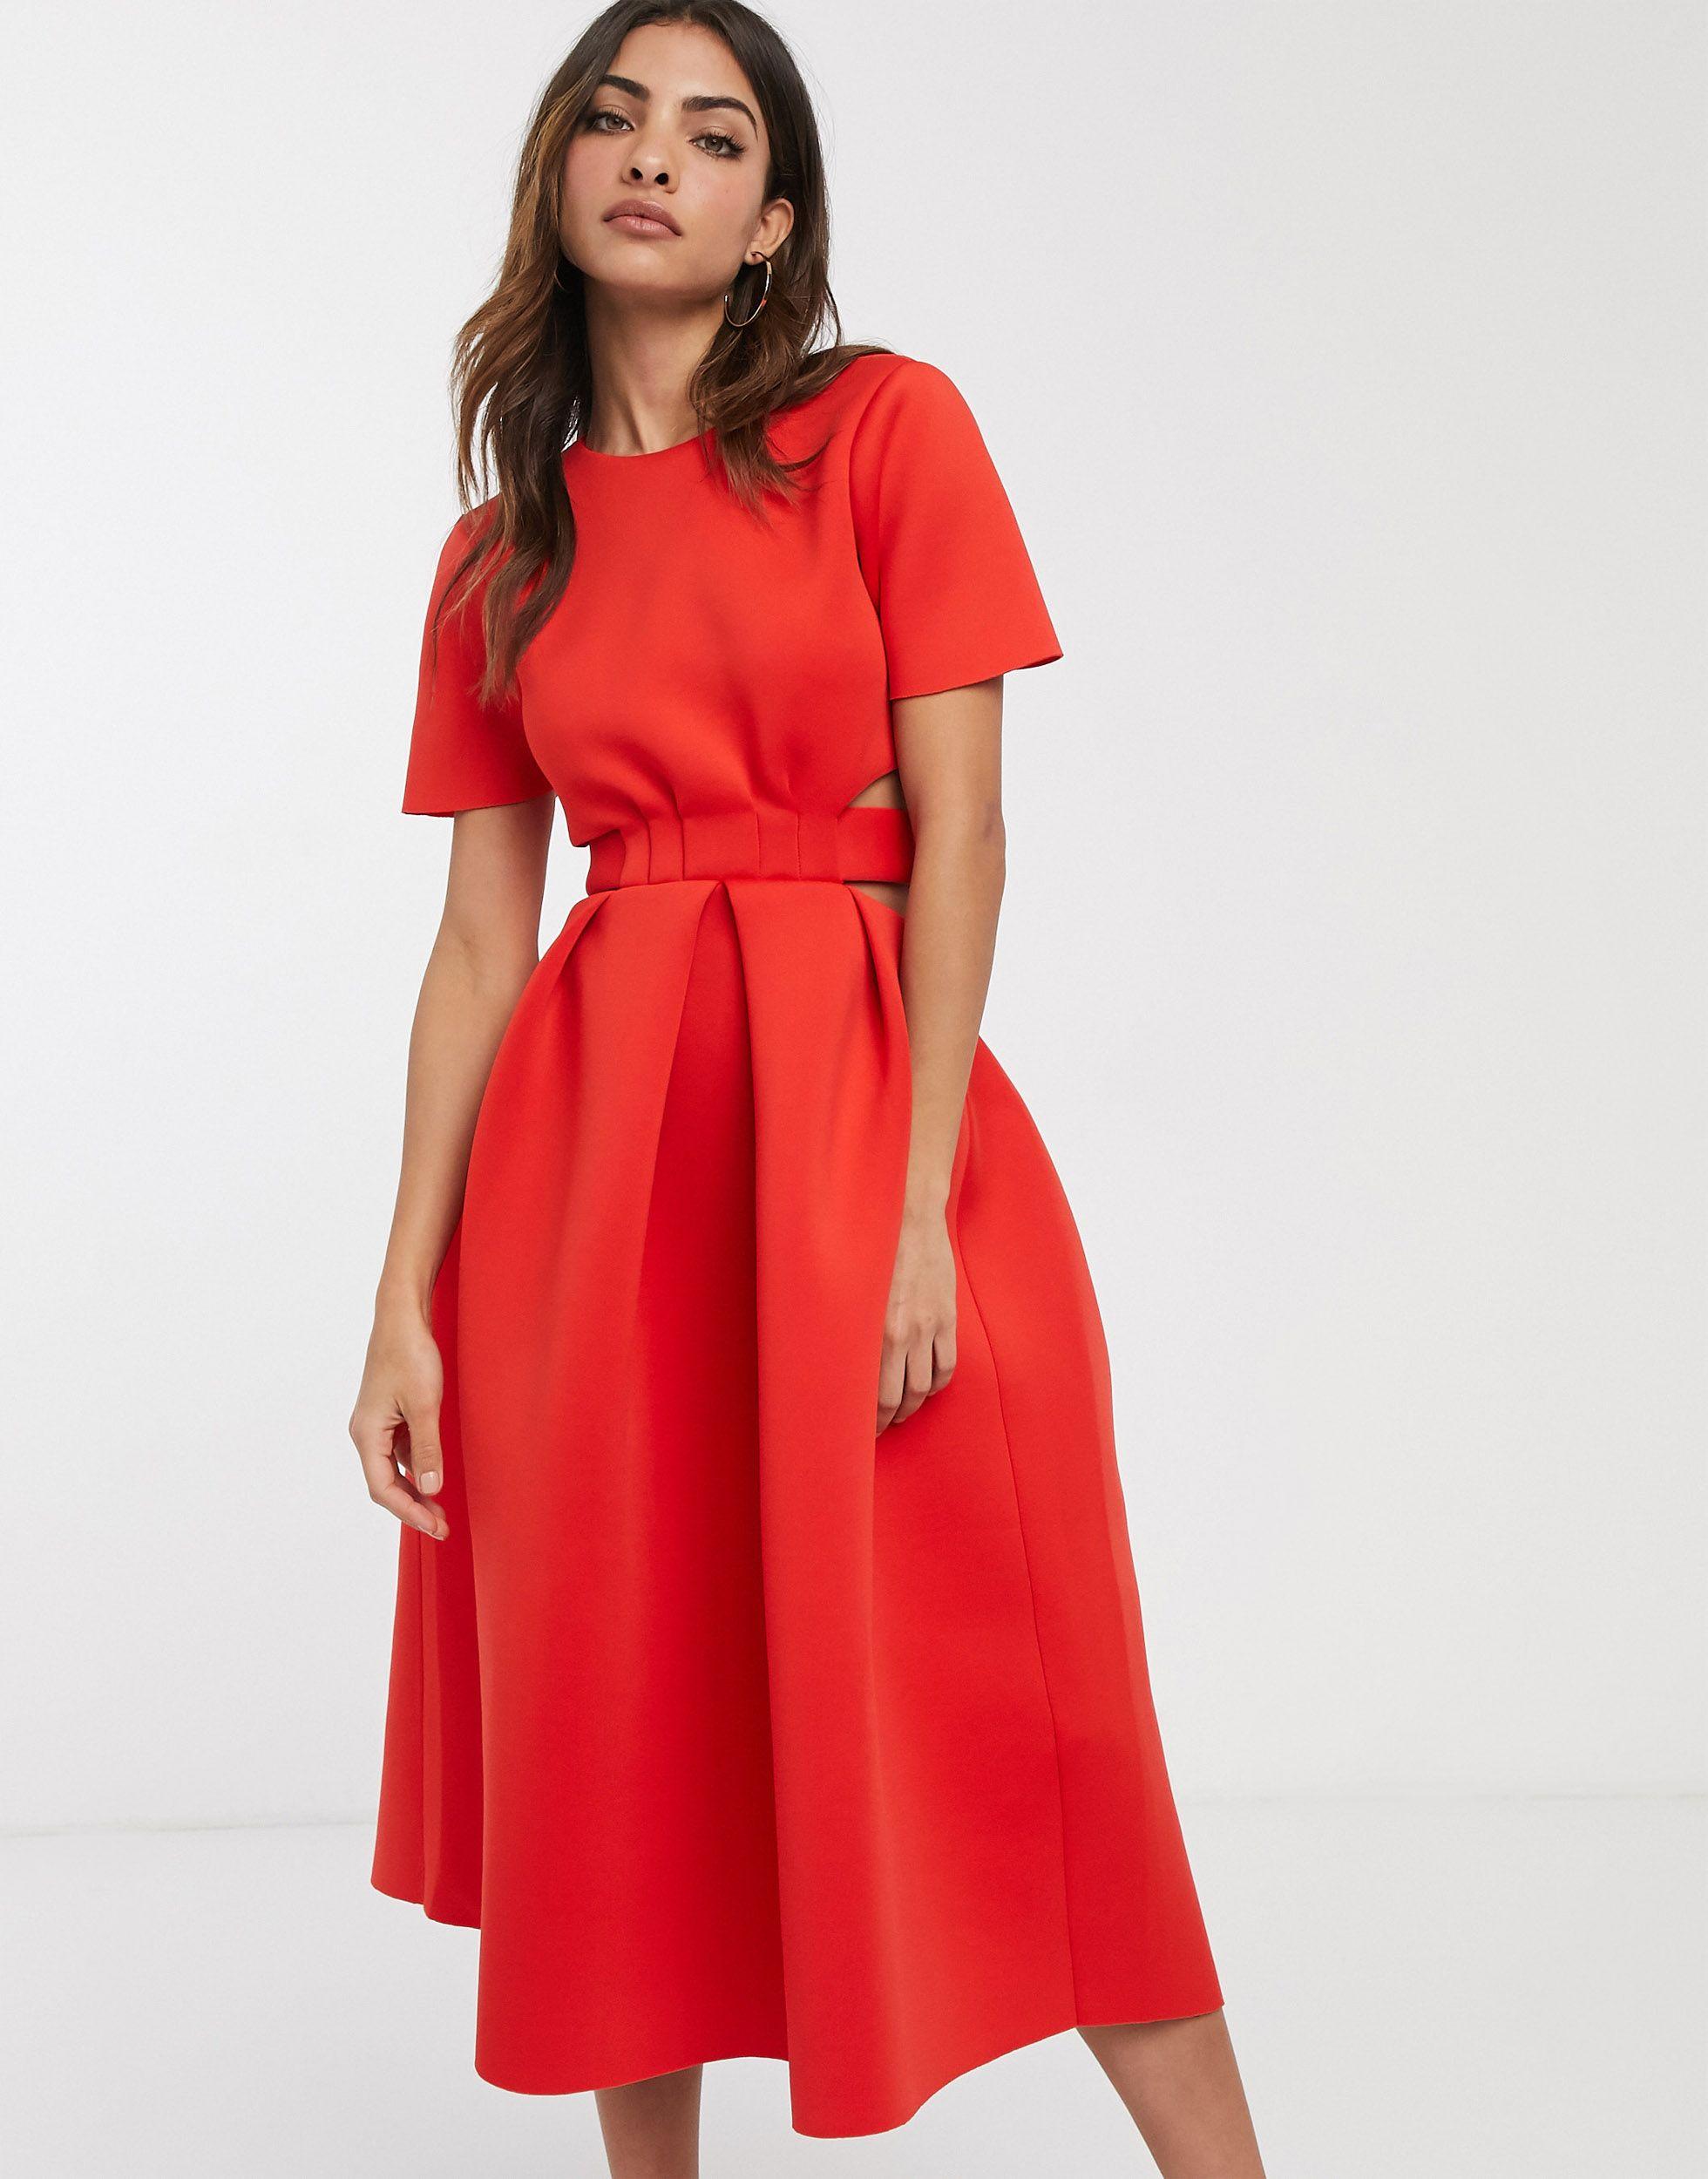 ASOS Synthetic T-shirt Belted Cut Out Midi Skater Dress in Red - Lyst